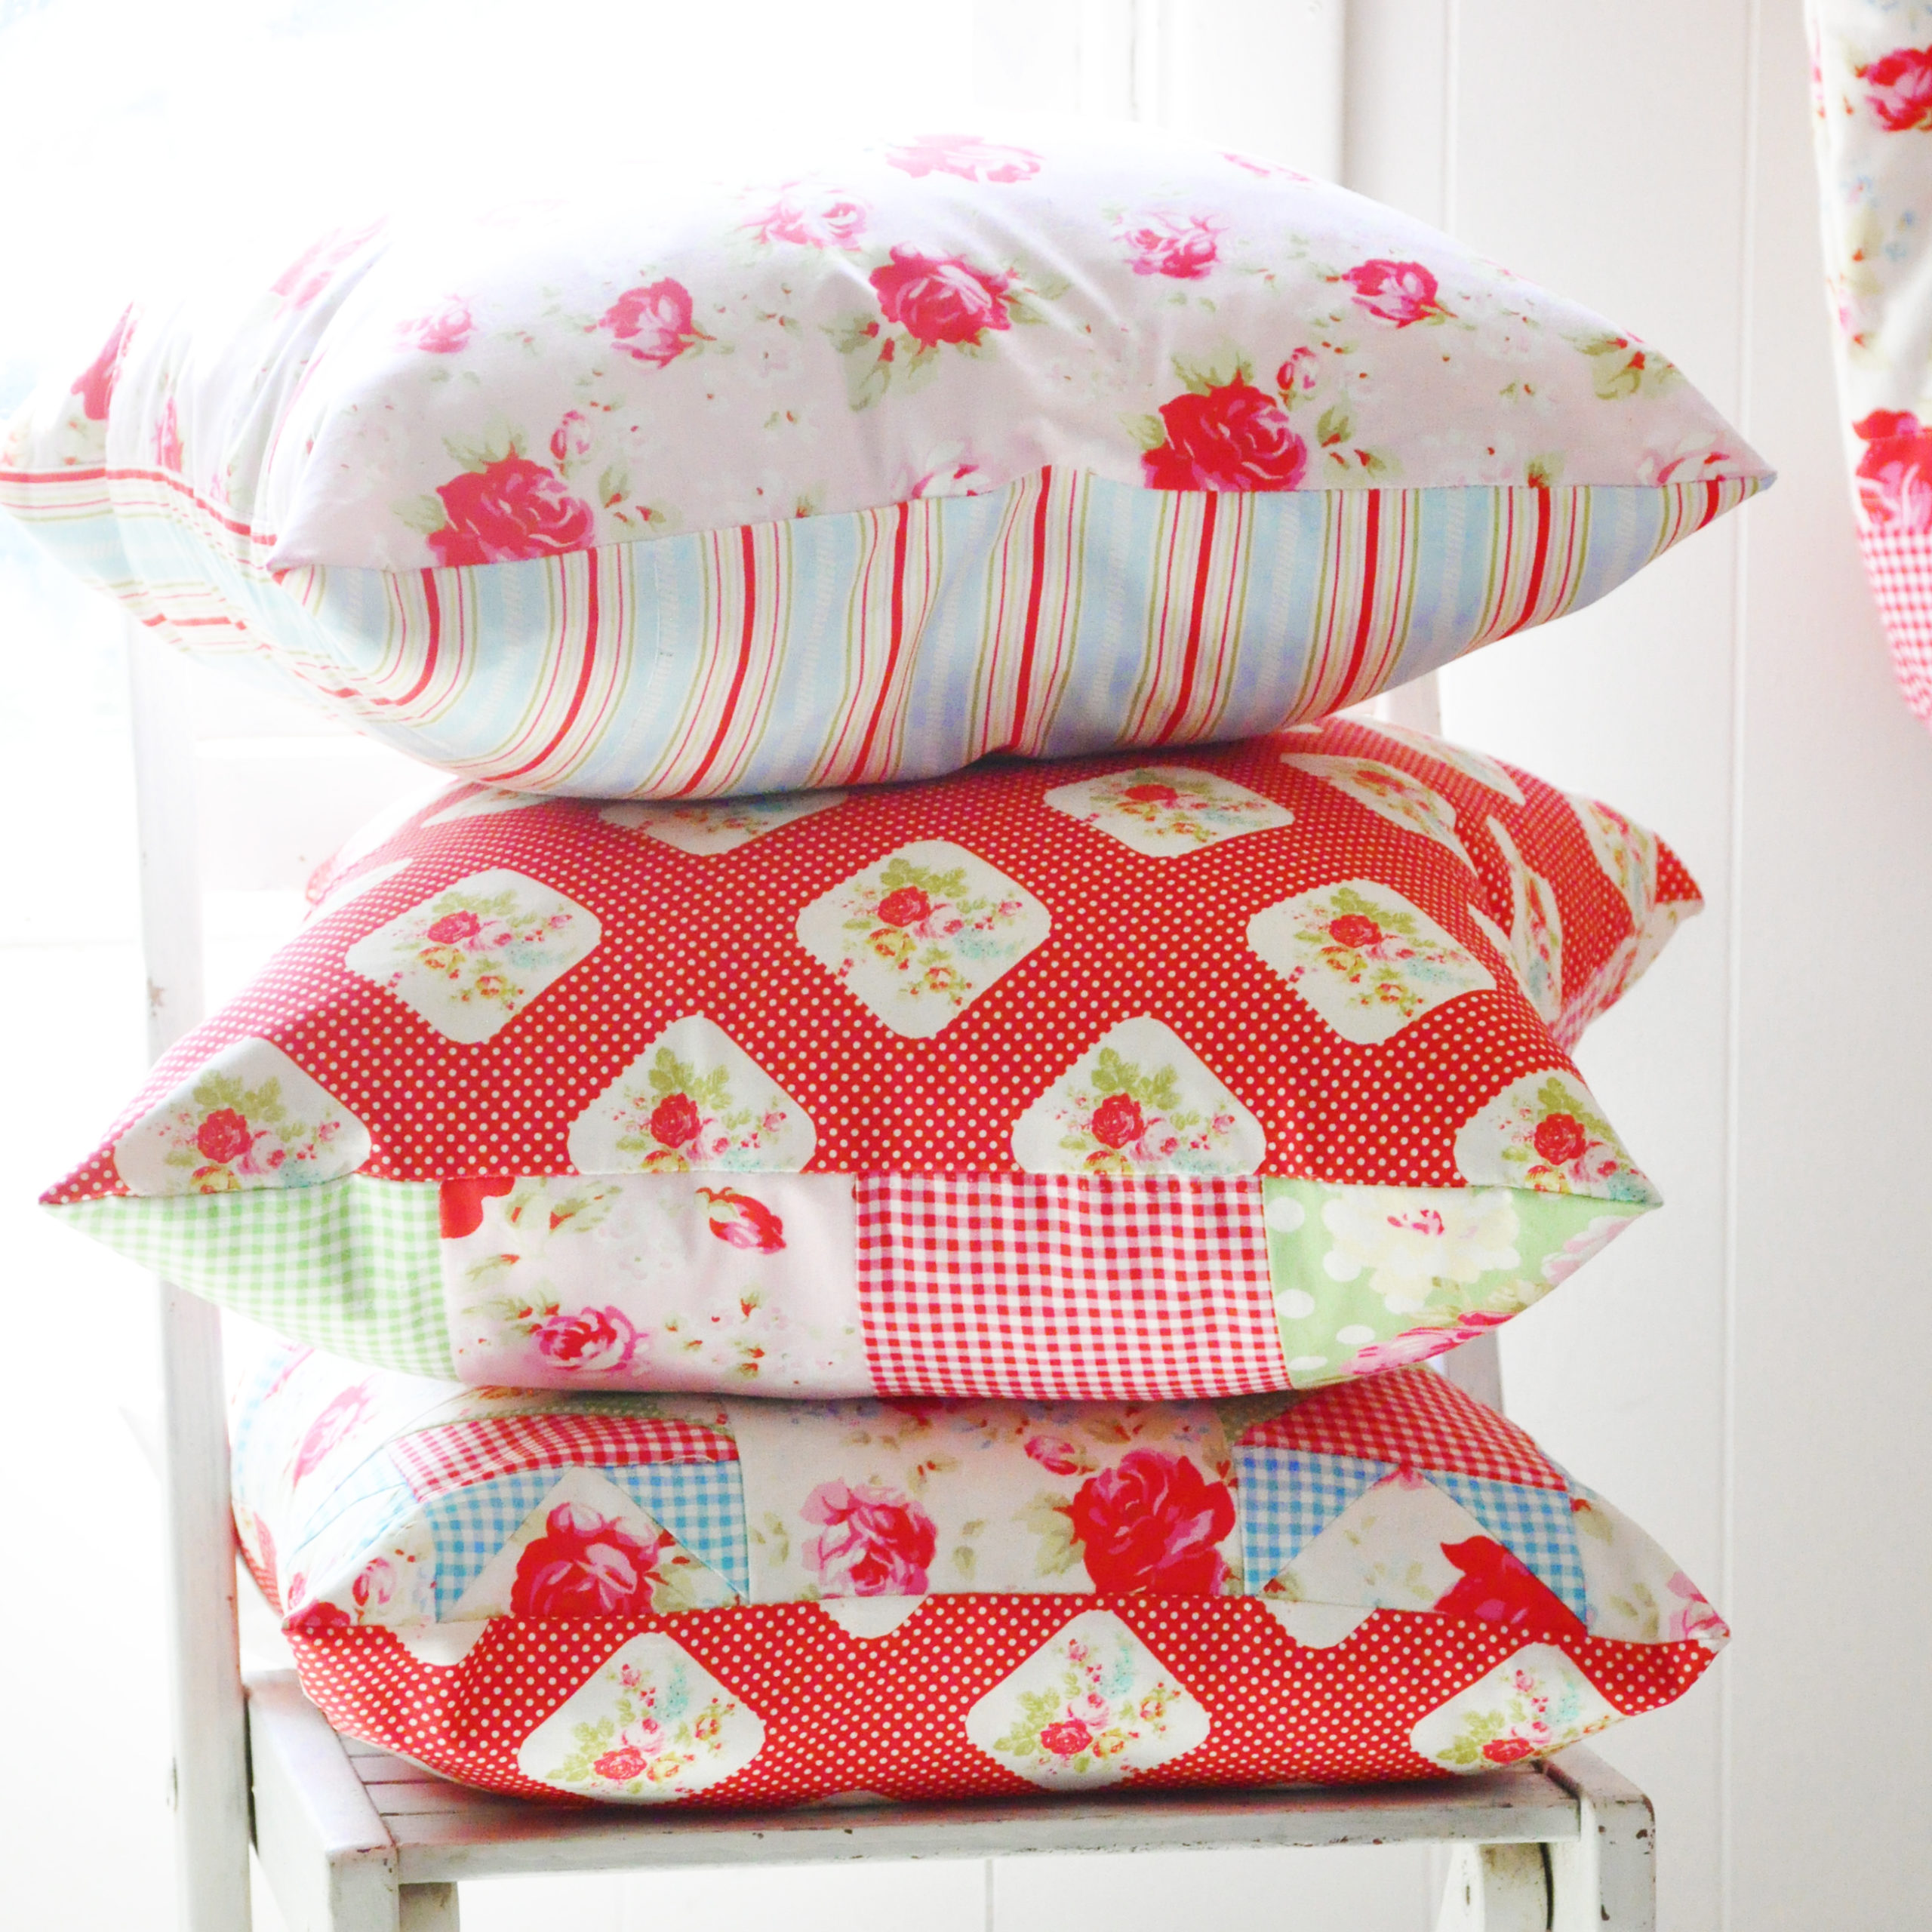 Pillows made in Tanya Whelan's Posie collection